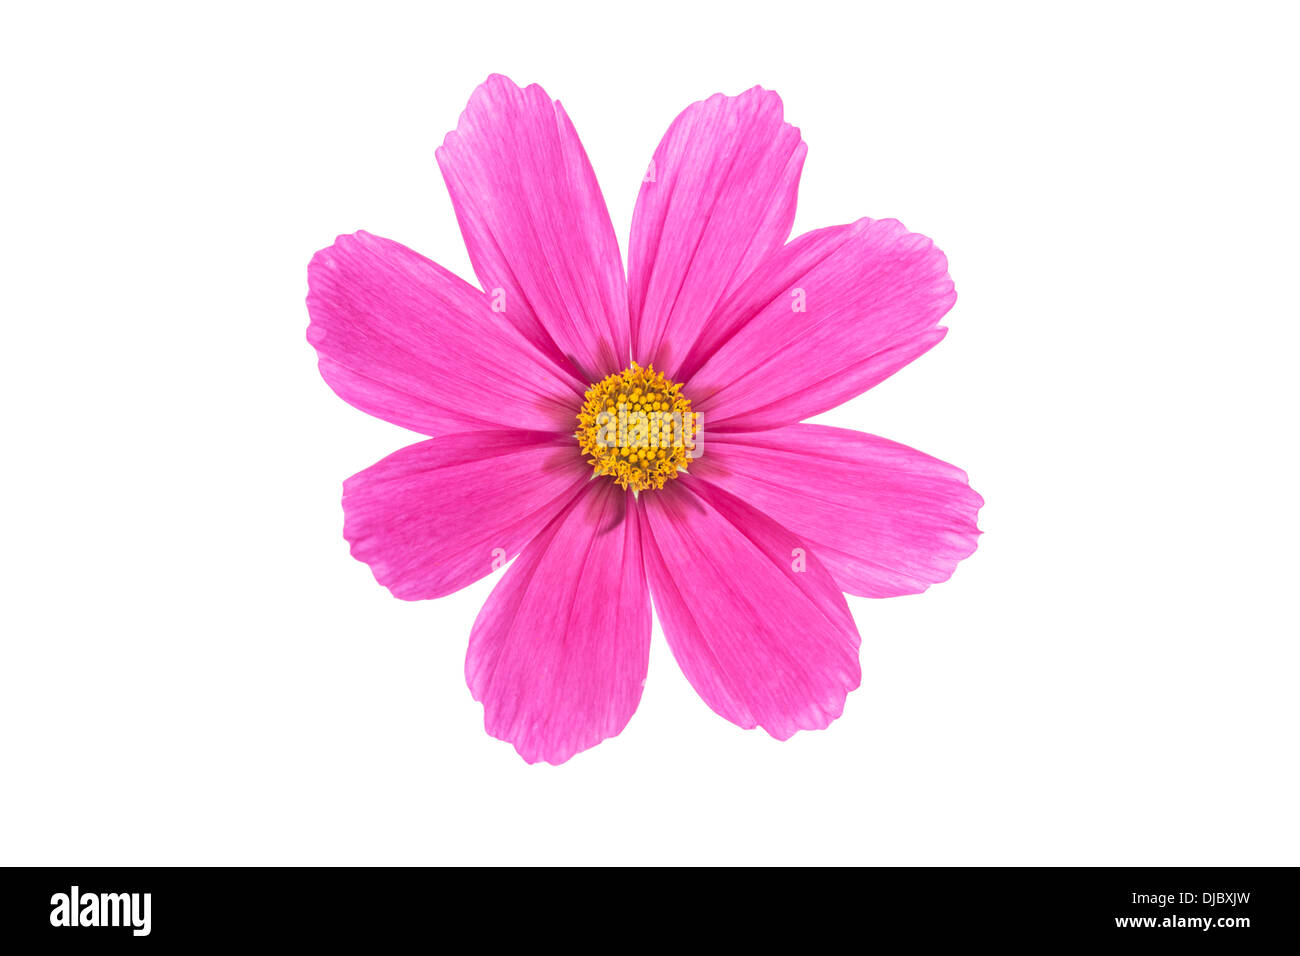 Cerise Pink Cosmos Flower isolated on white background with shallow depth of field and soft focus the petals of the flower Stock Photo